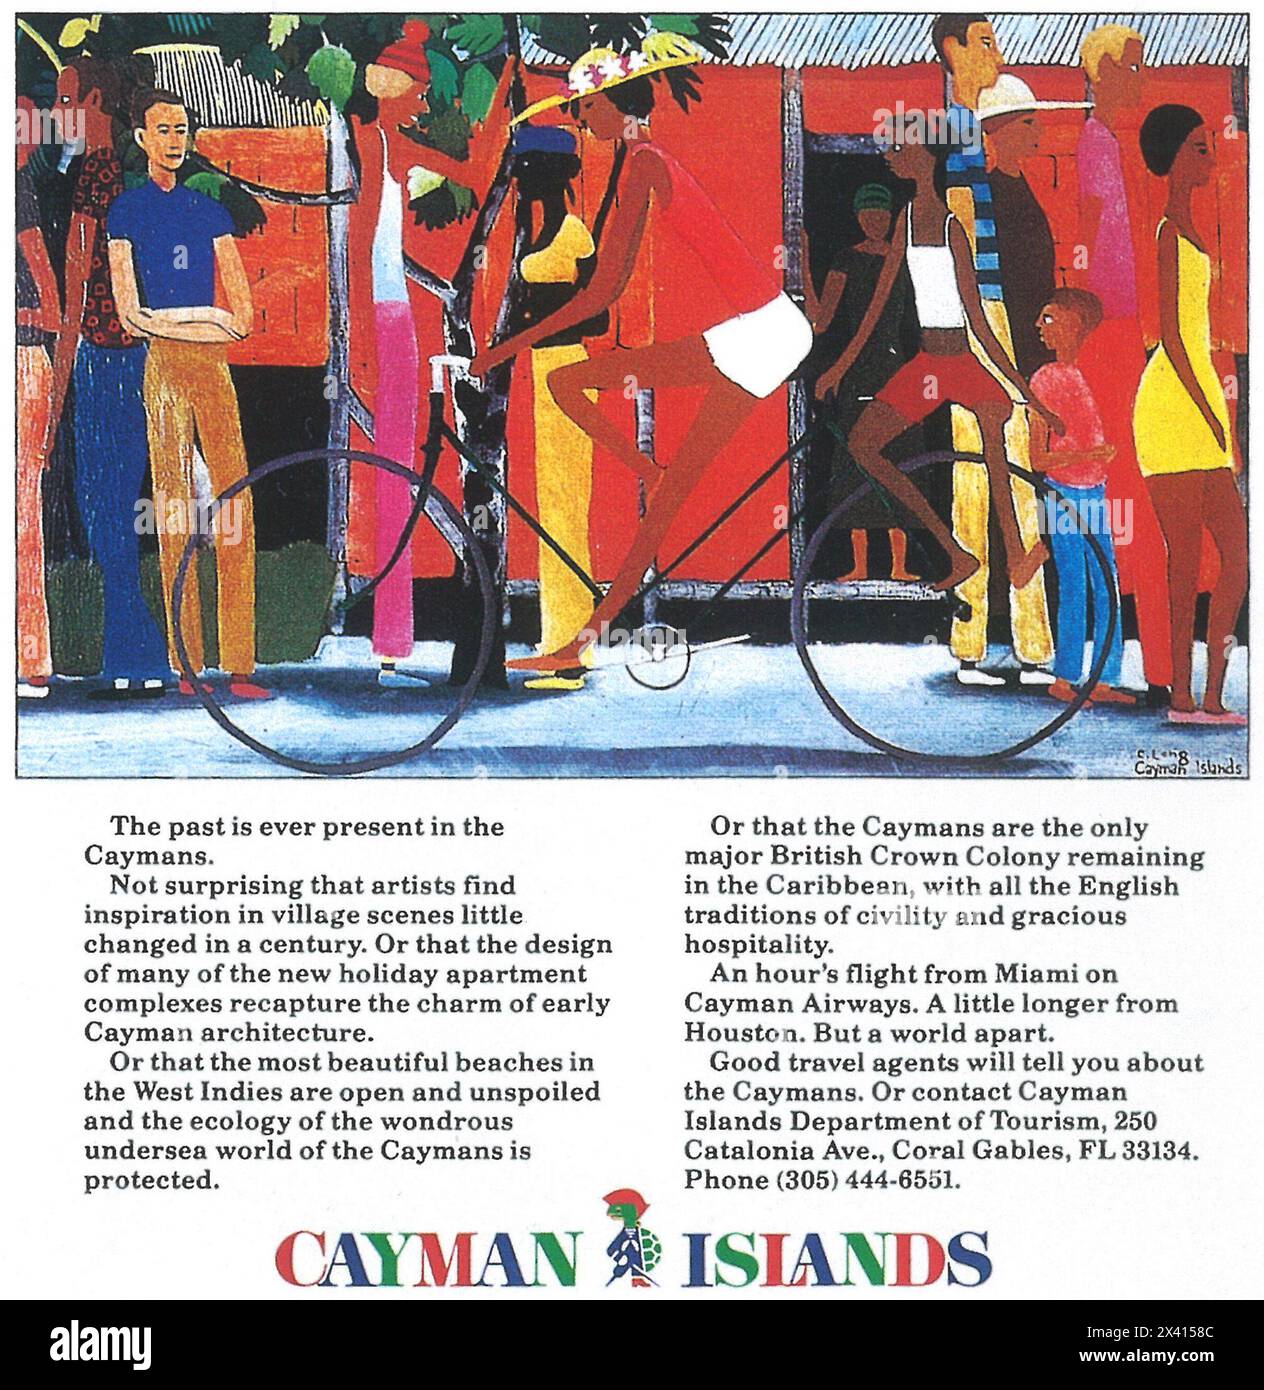 1982 Cayman Islands Tourism Department ad con Charles Long Painting Foto Stock